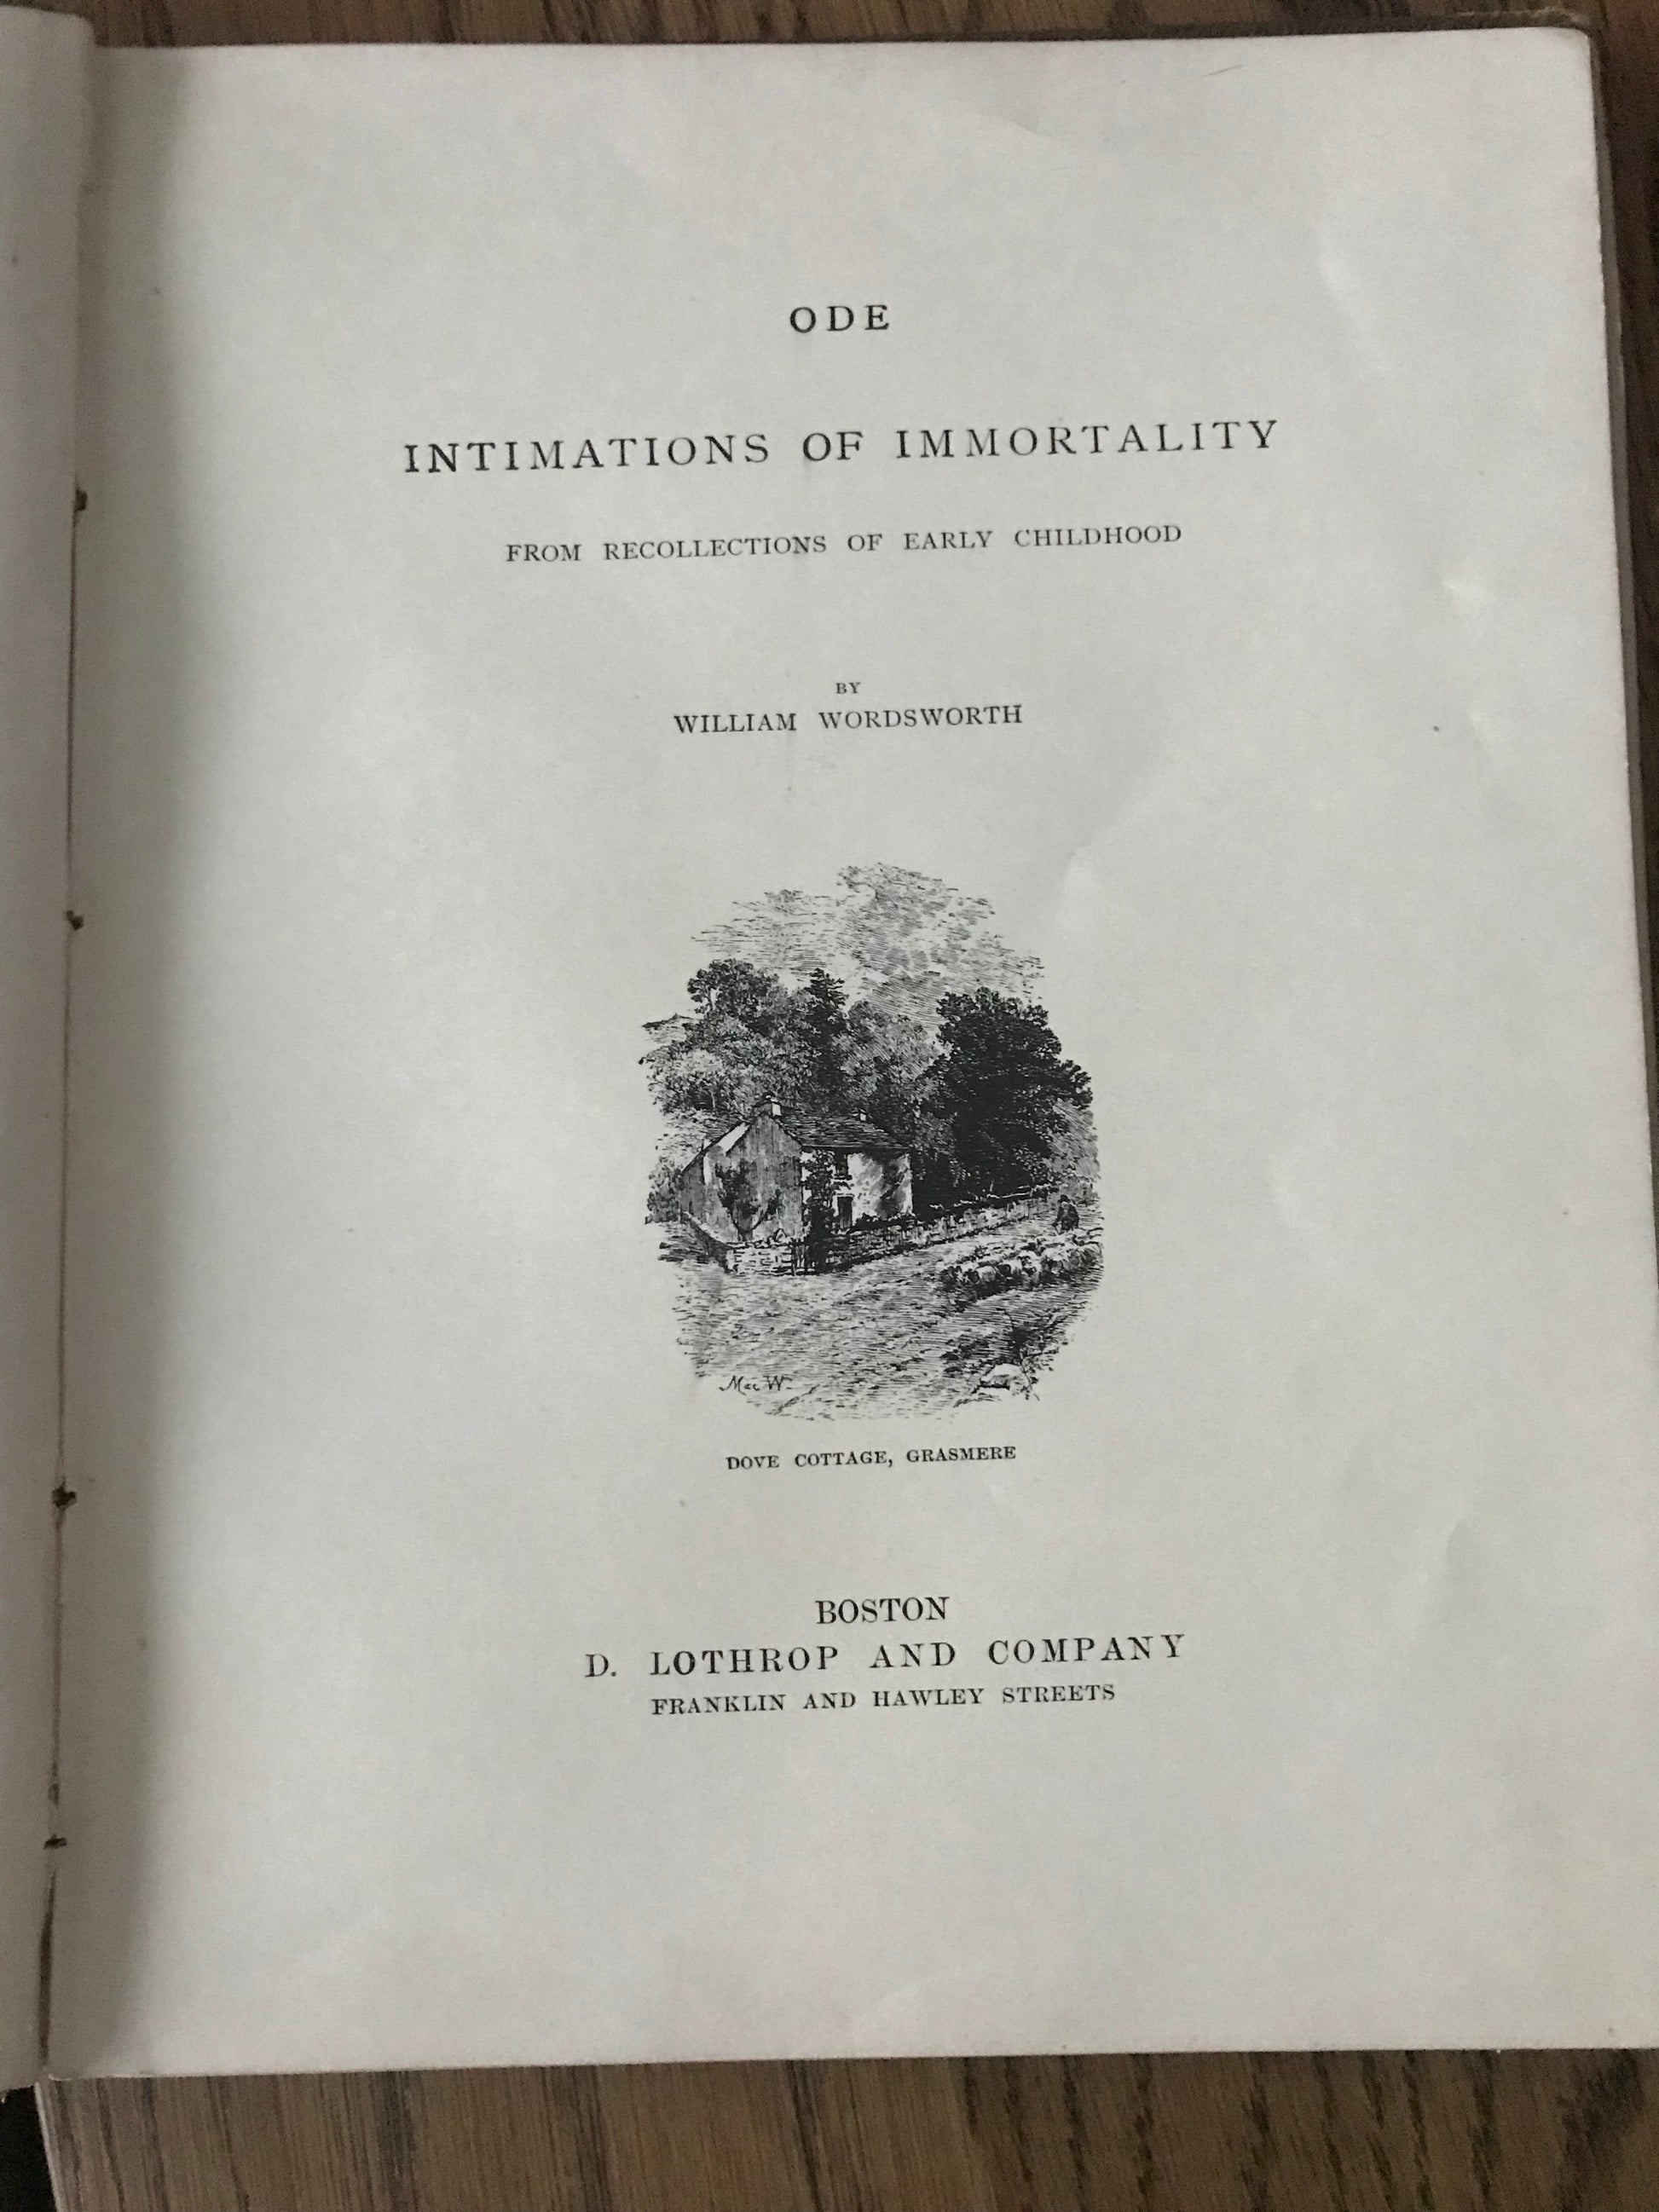 ODE INTIMATIONS OF IMMORTALITY  - WILLIAM WORDSWORTH BooksCardsNBikes